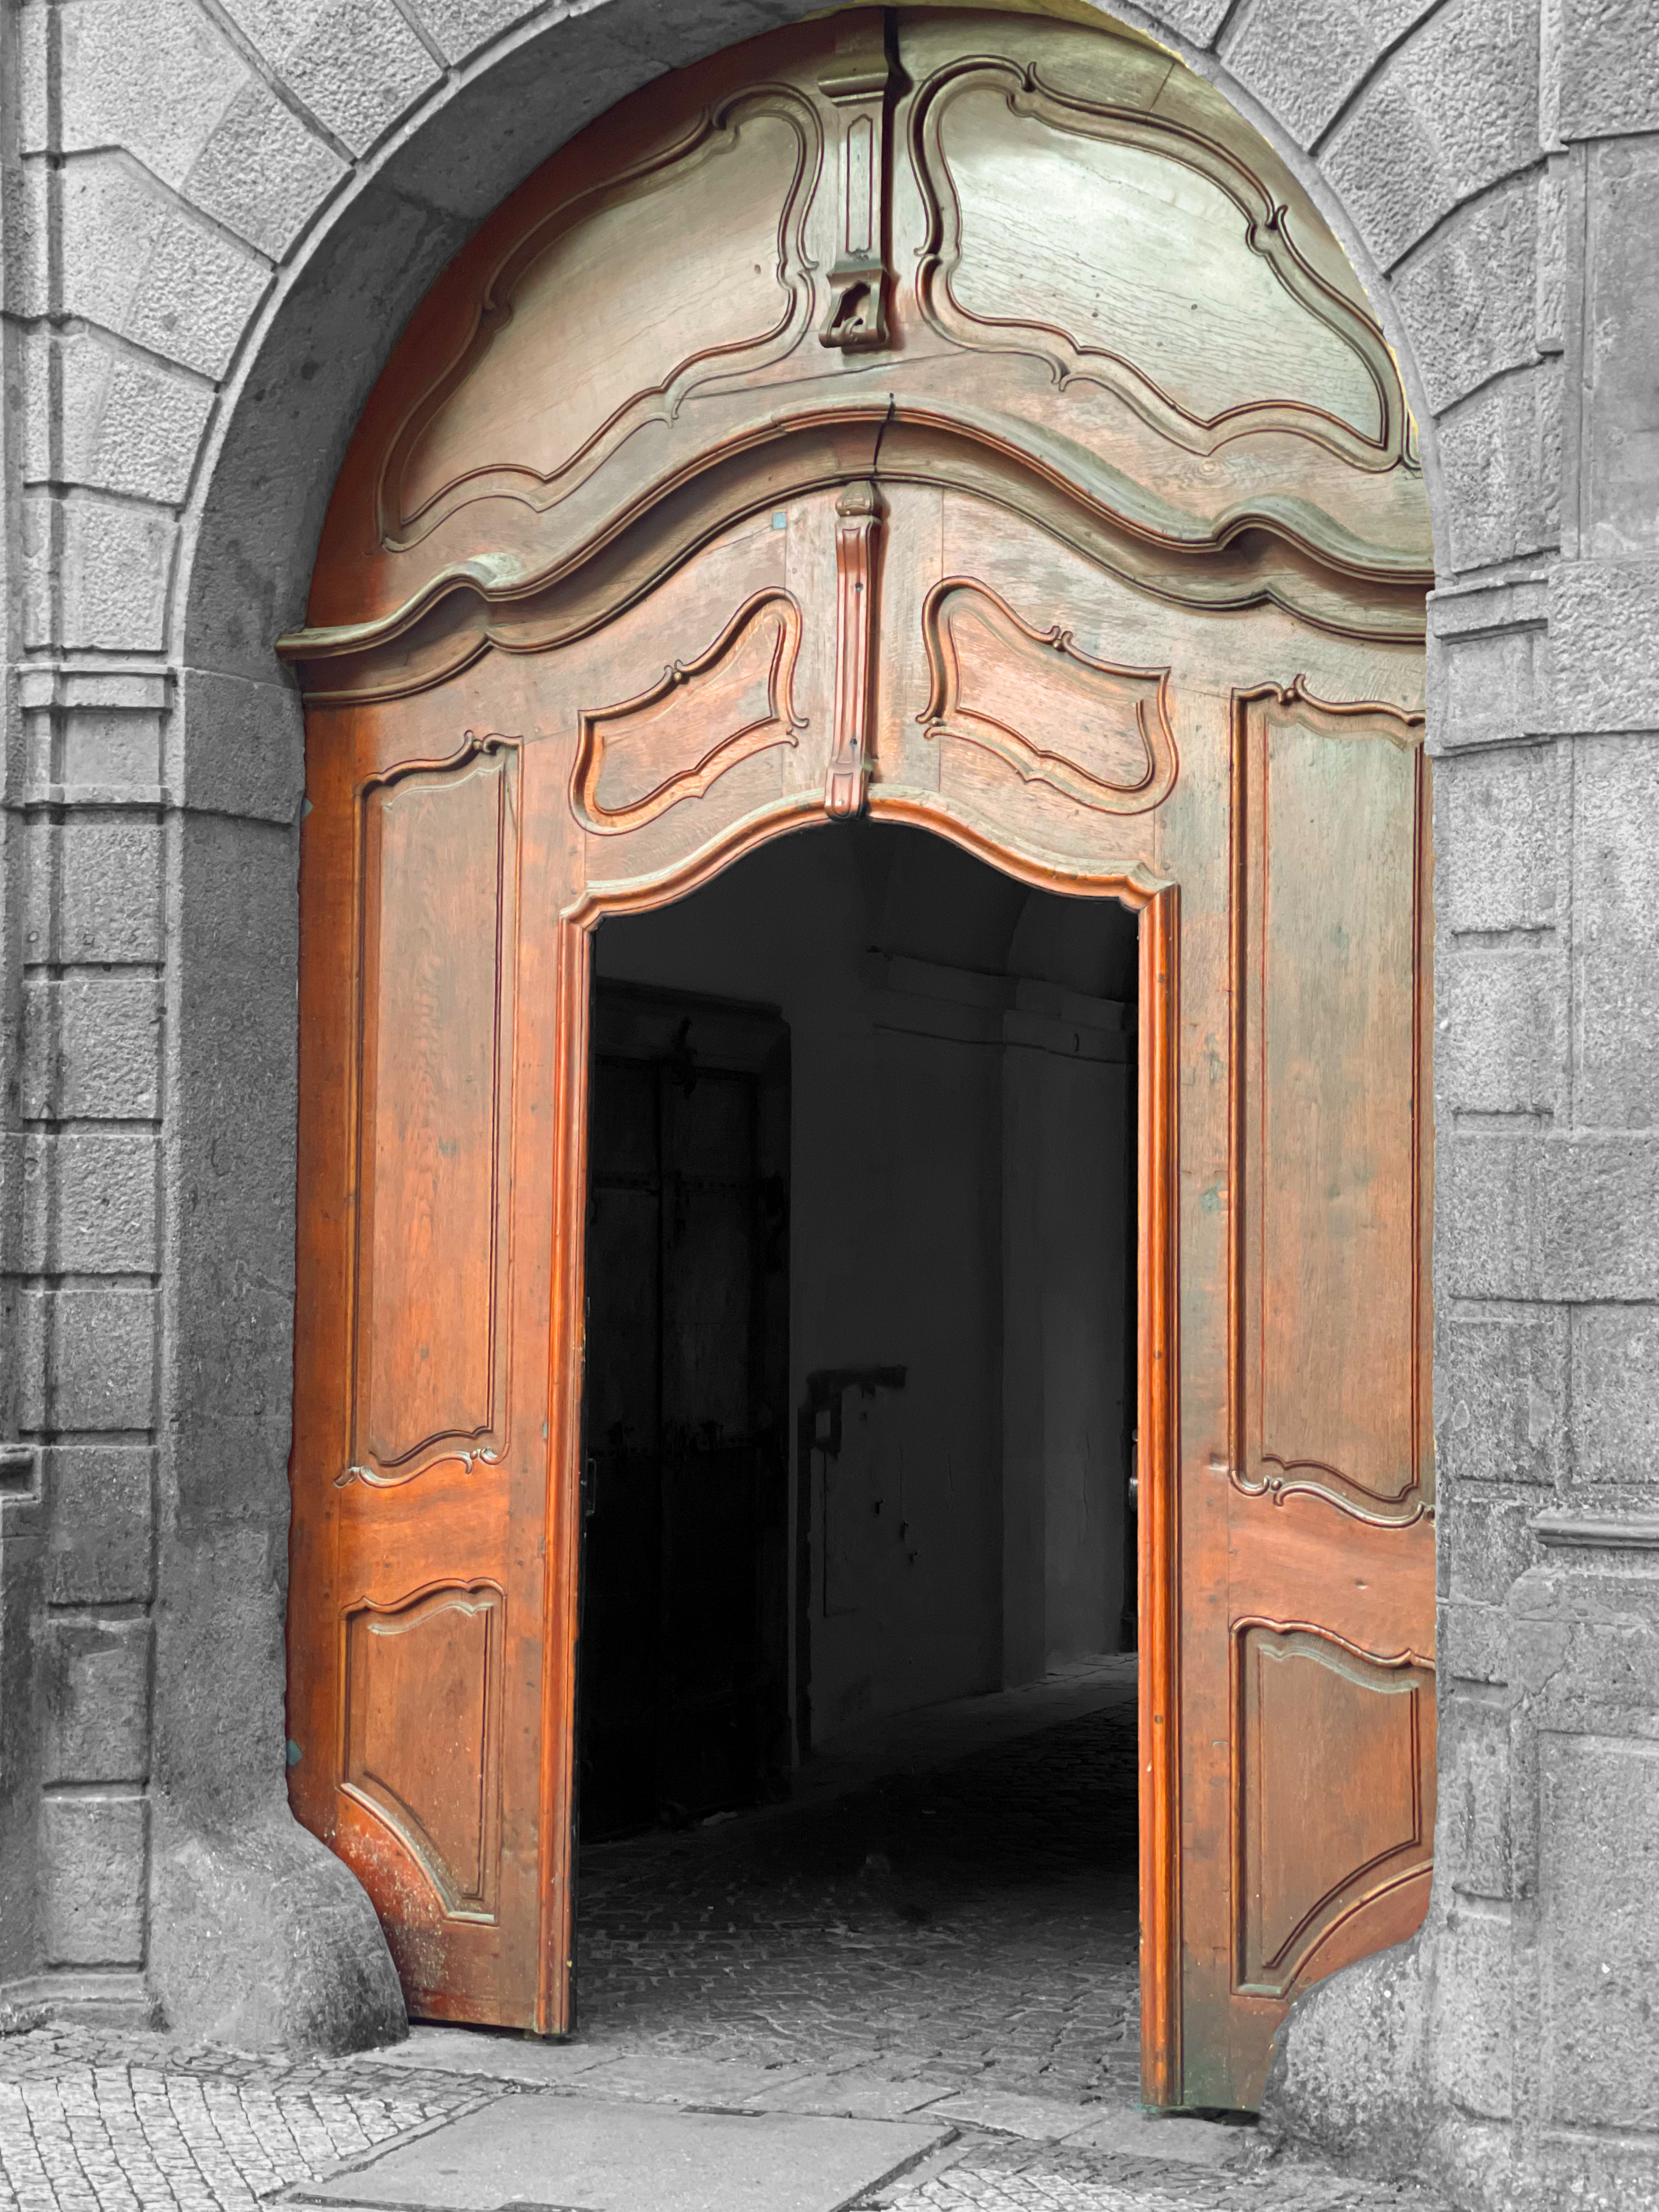 An ornate arched wooden door with a stone surround. The wooden door is open.